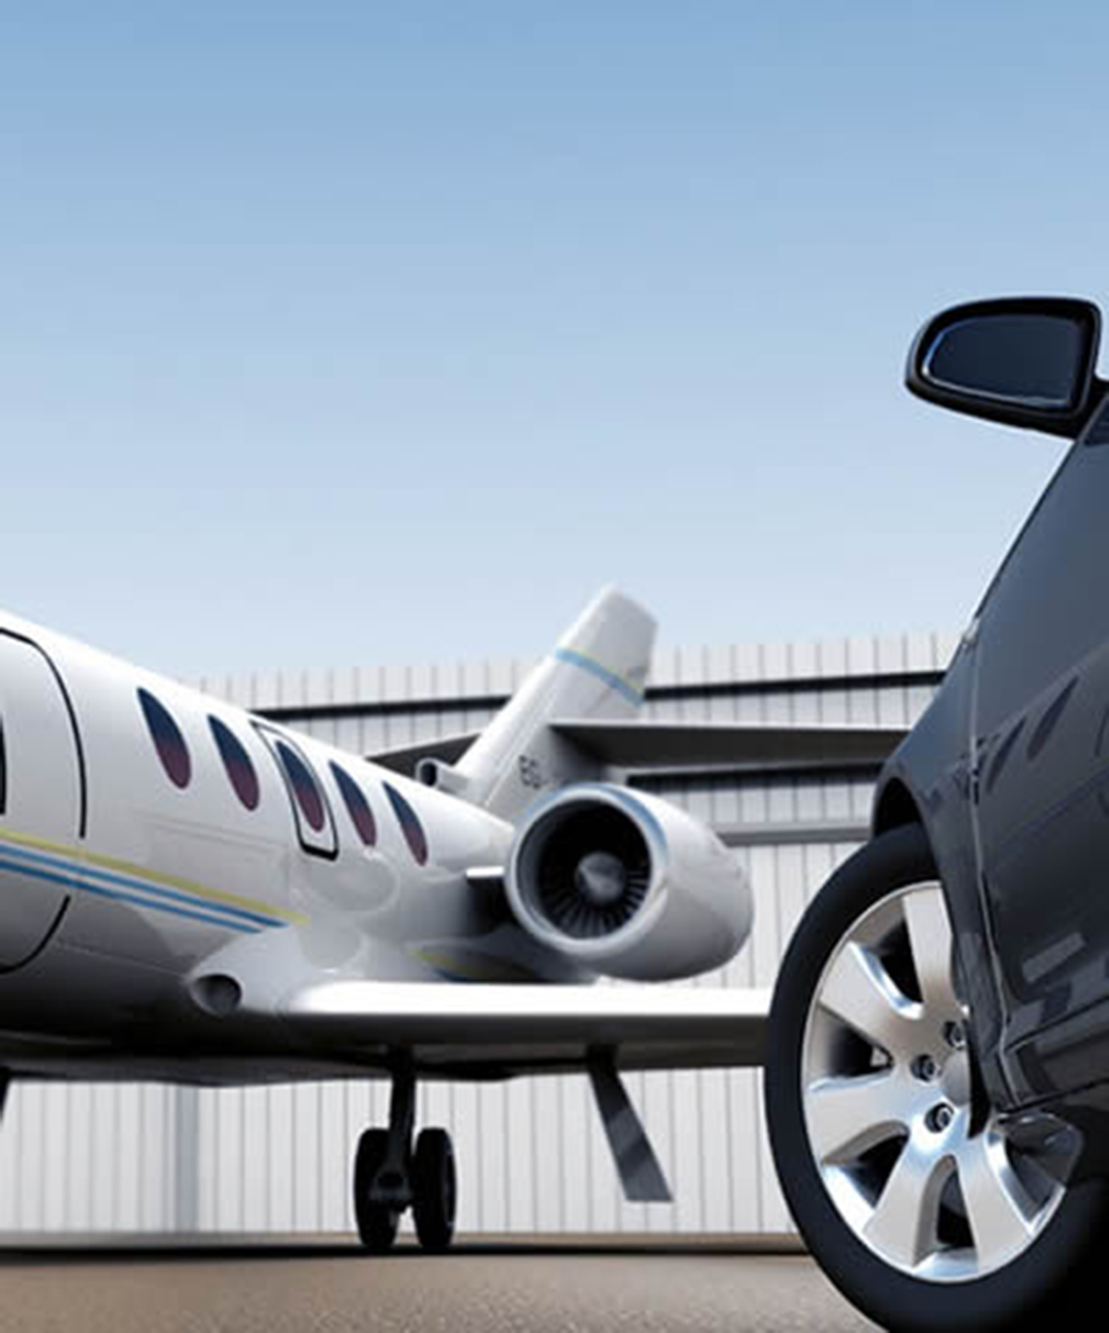 Airport Taxi Birmingham: Your Hassle-Free Travel Solution